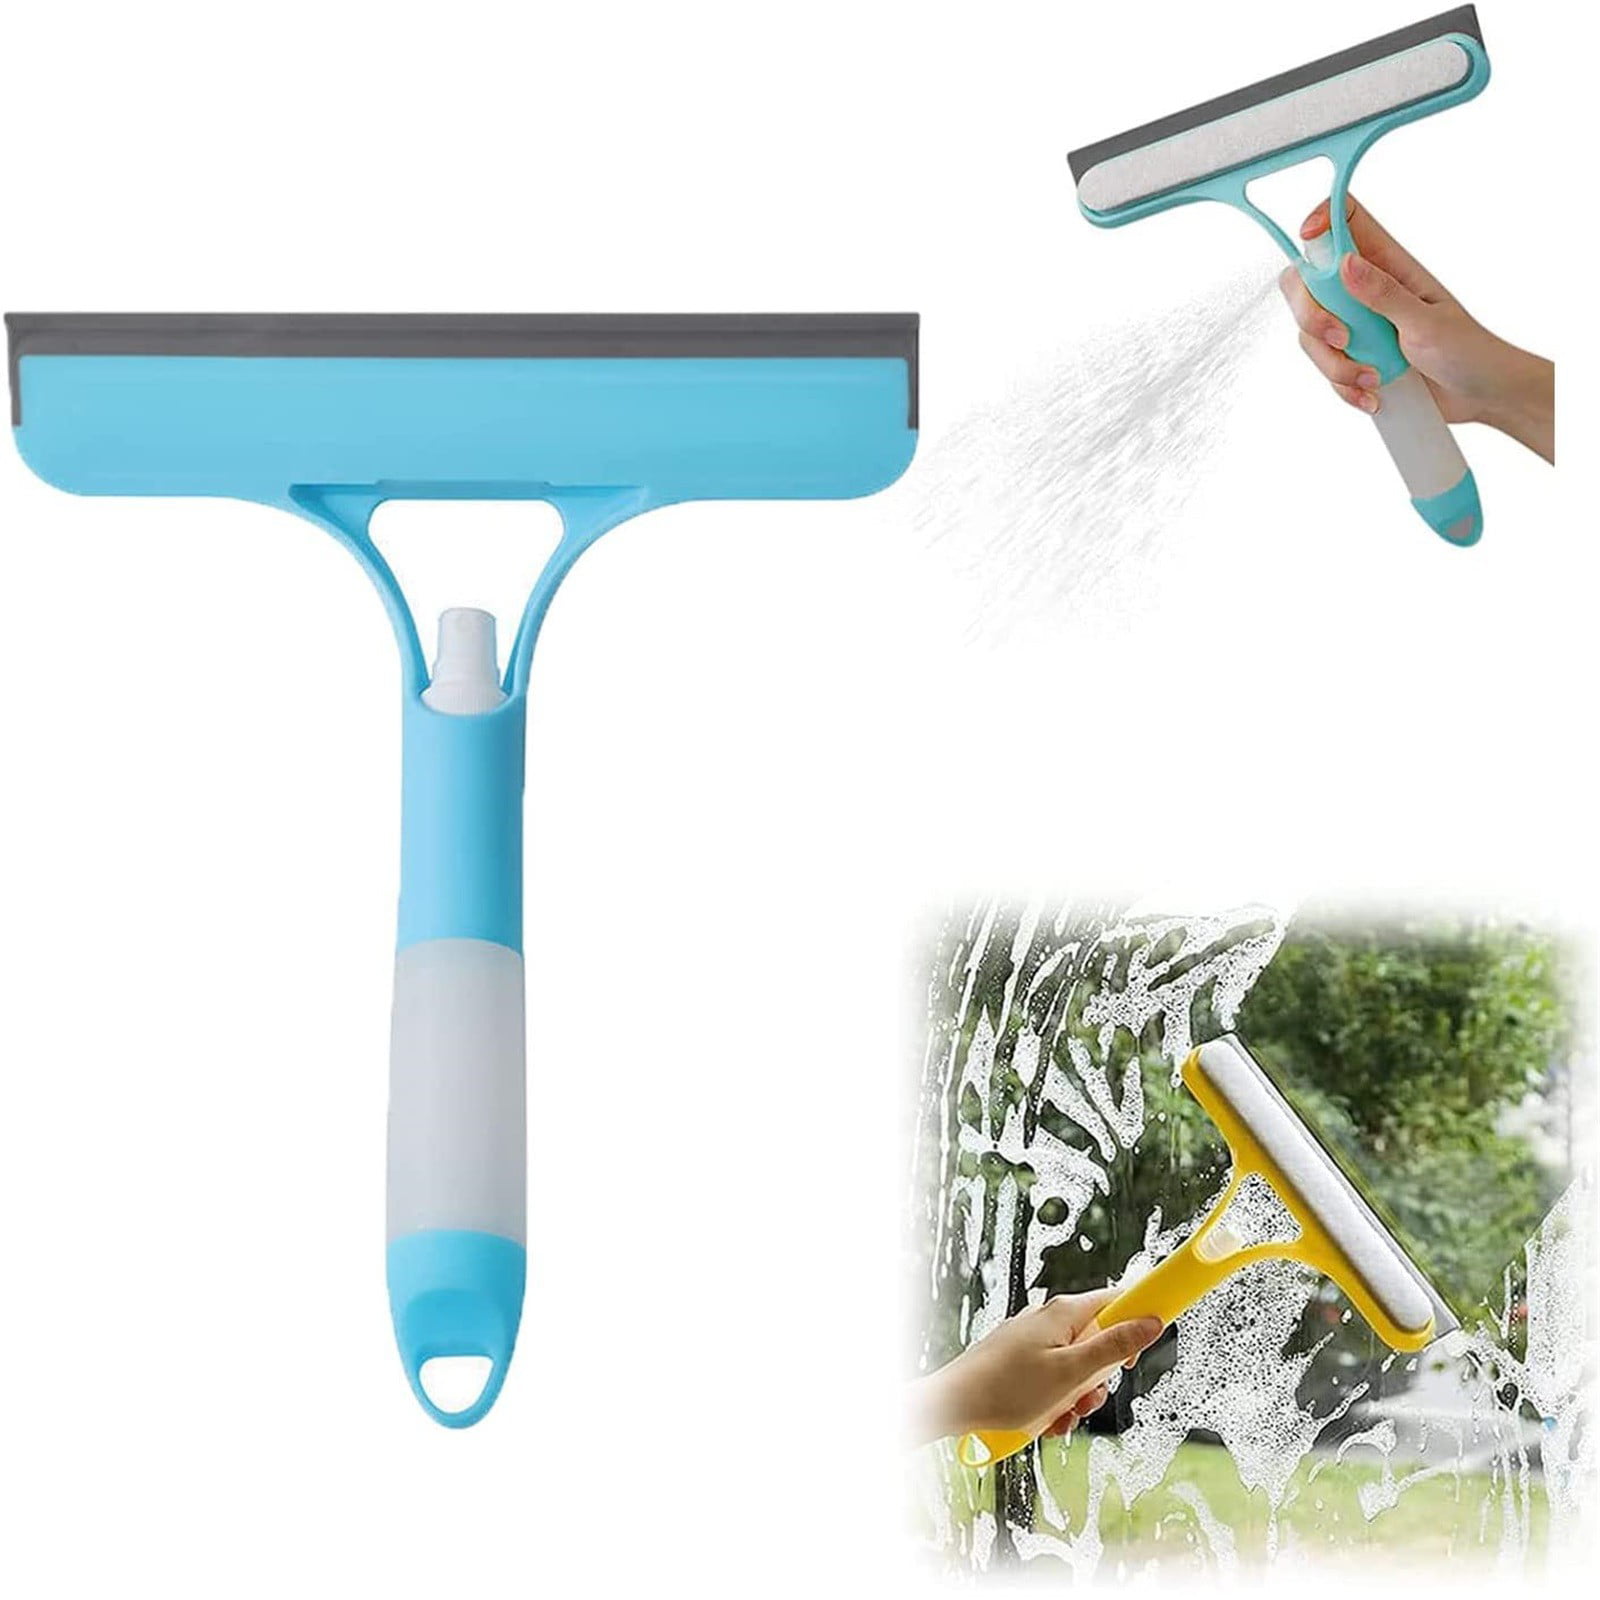 Cordless Window Vacuum, 3-in-1 Rechargeable Window Squeegee for Shower  Glass Doors, Car Window Cleaning, Home Mirrors, Tile, Electric Window  Cleaning Tool with 260ml Water Tank 